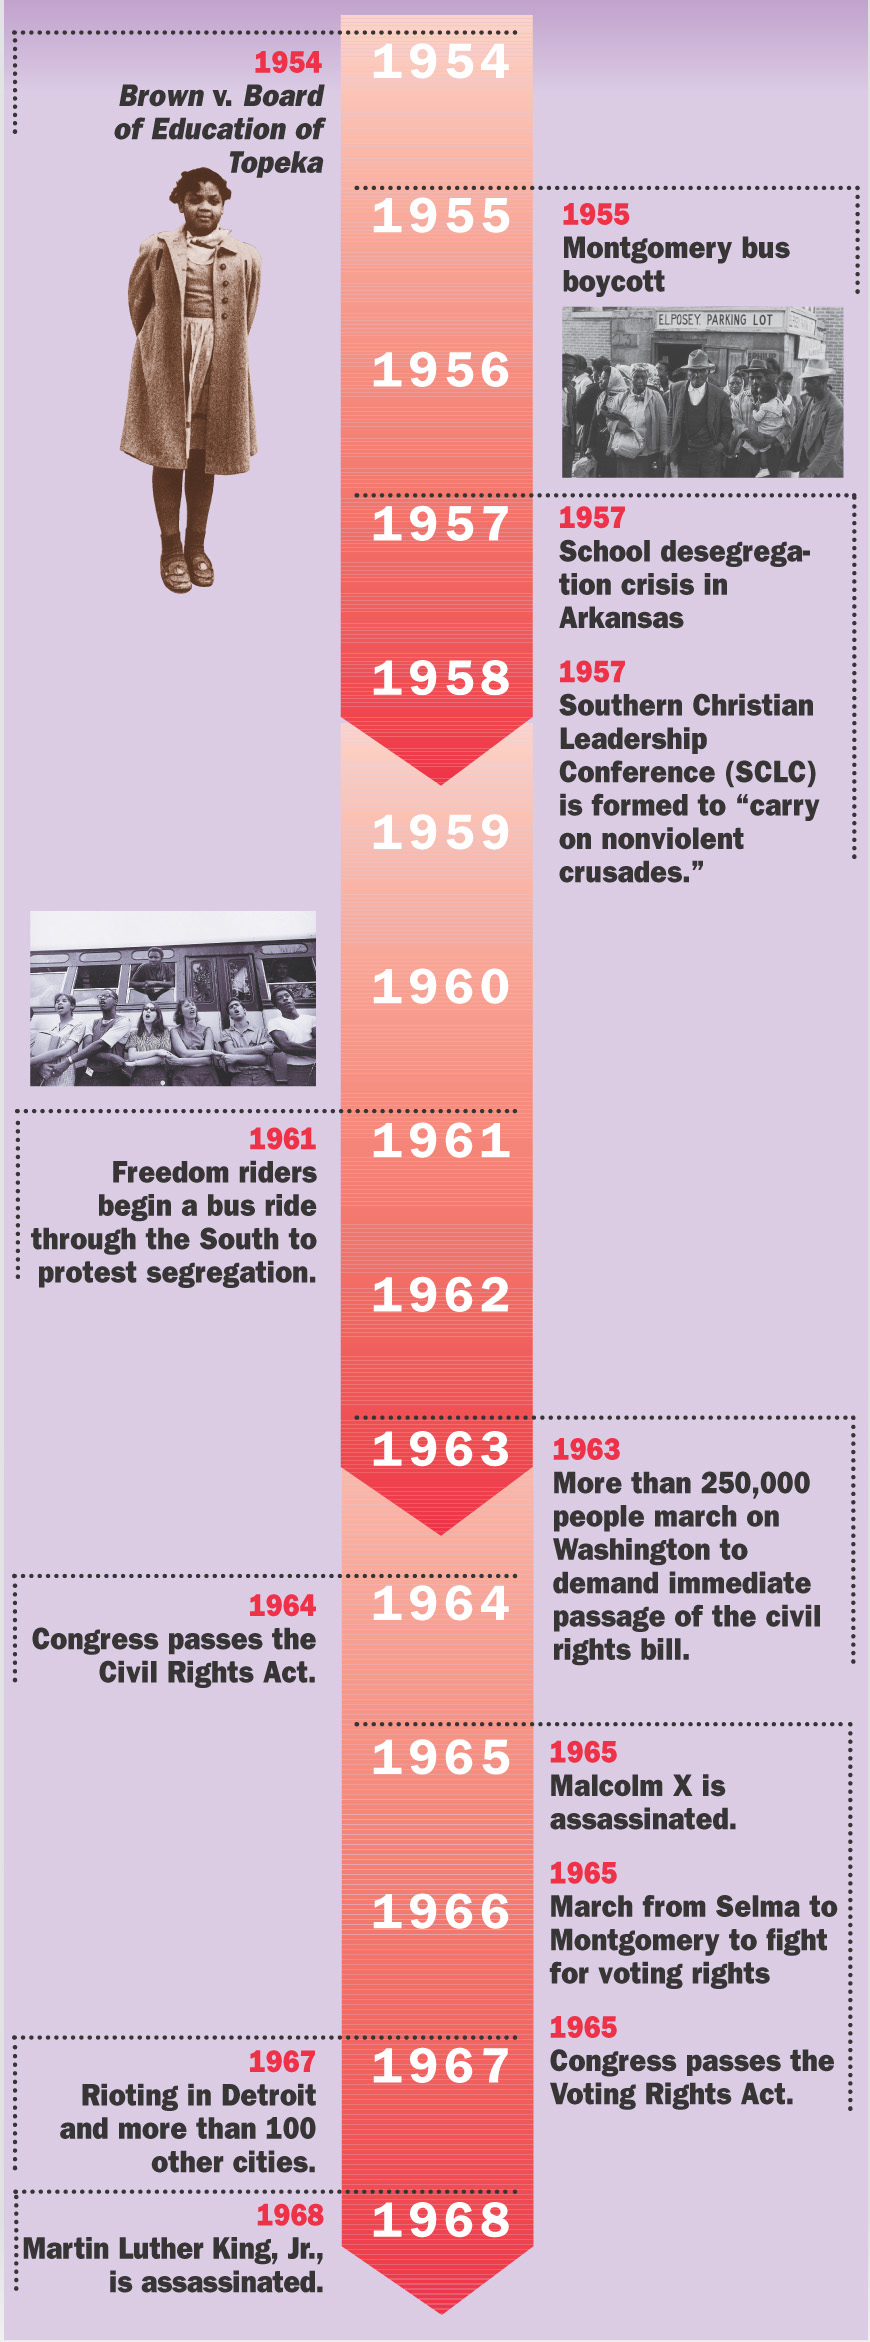 a timeline shows events in the civil rights movement, 1854-1968.